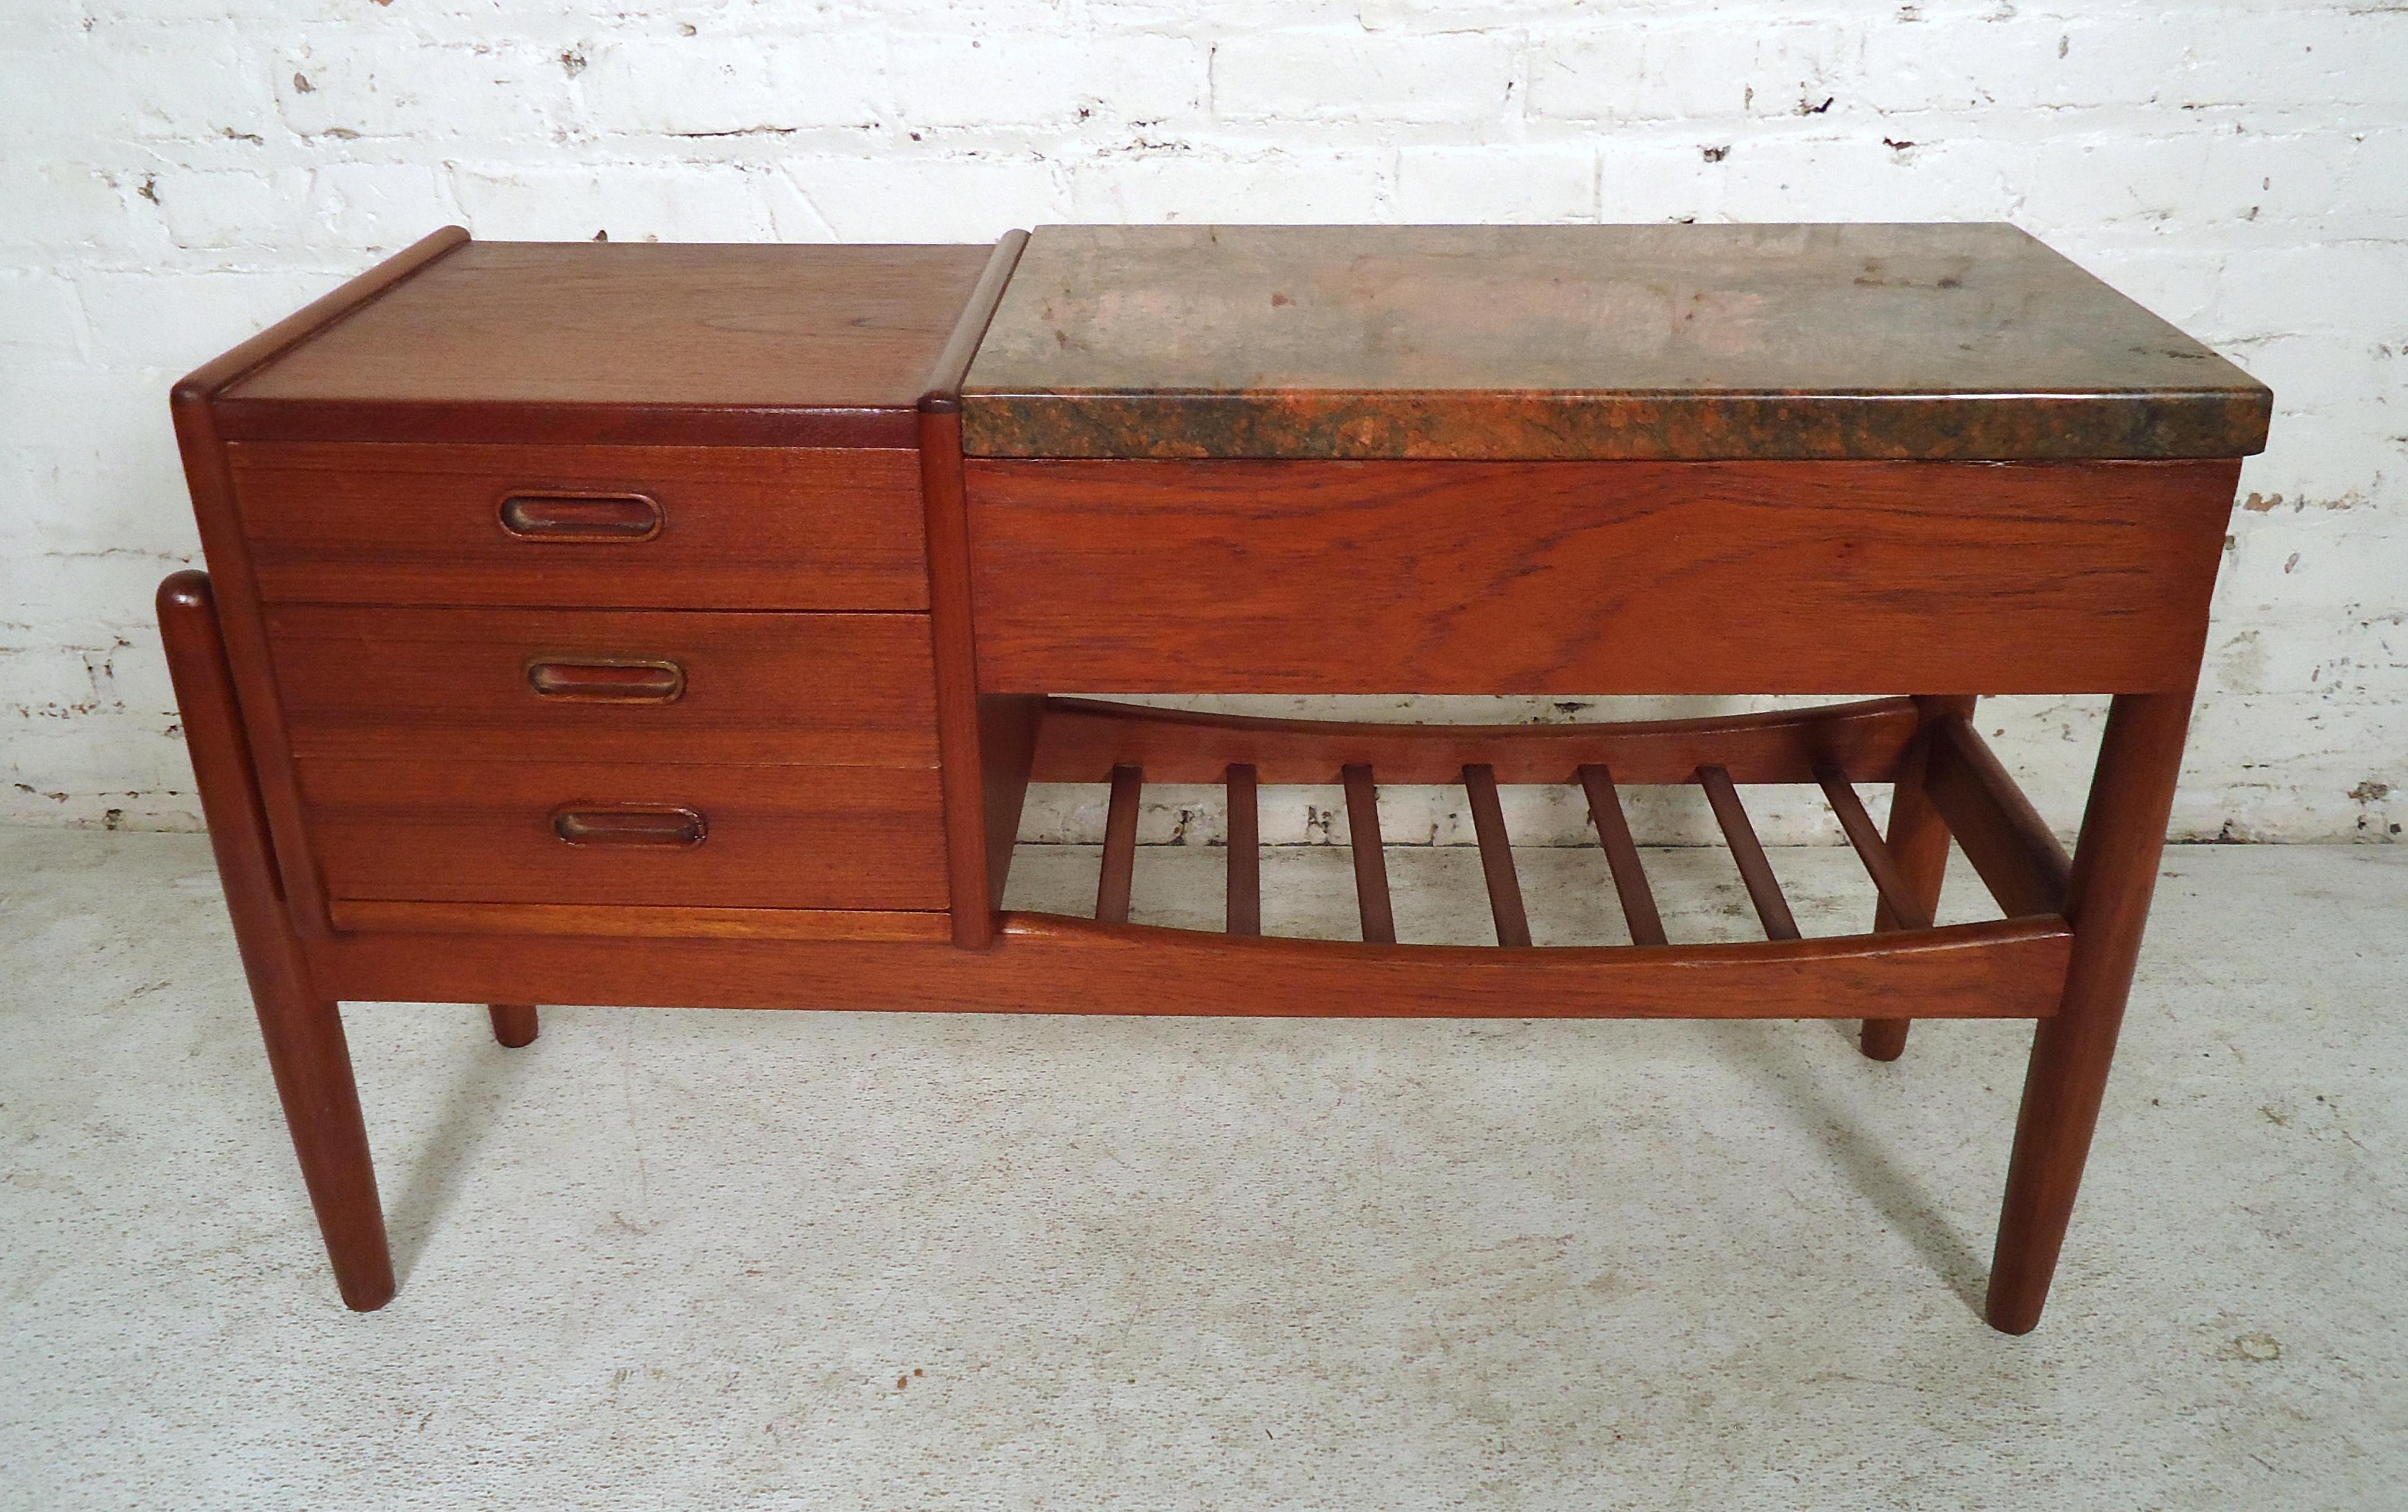 Midcentury Danish modern side table featuring a stone top, three drawers in rich teak wood grain and tapered legs.
Please confirm item location (NY or NJ) with dealer.